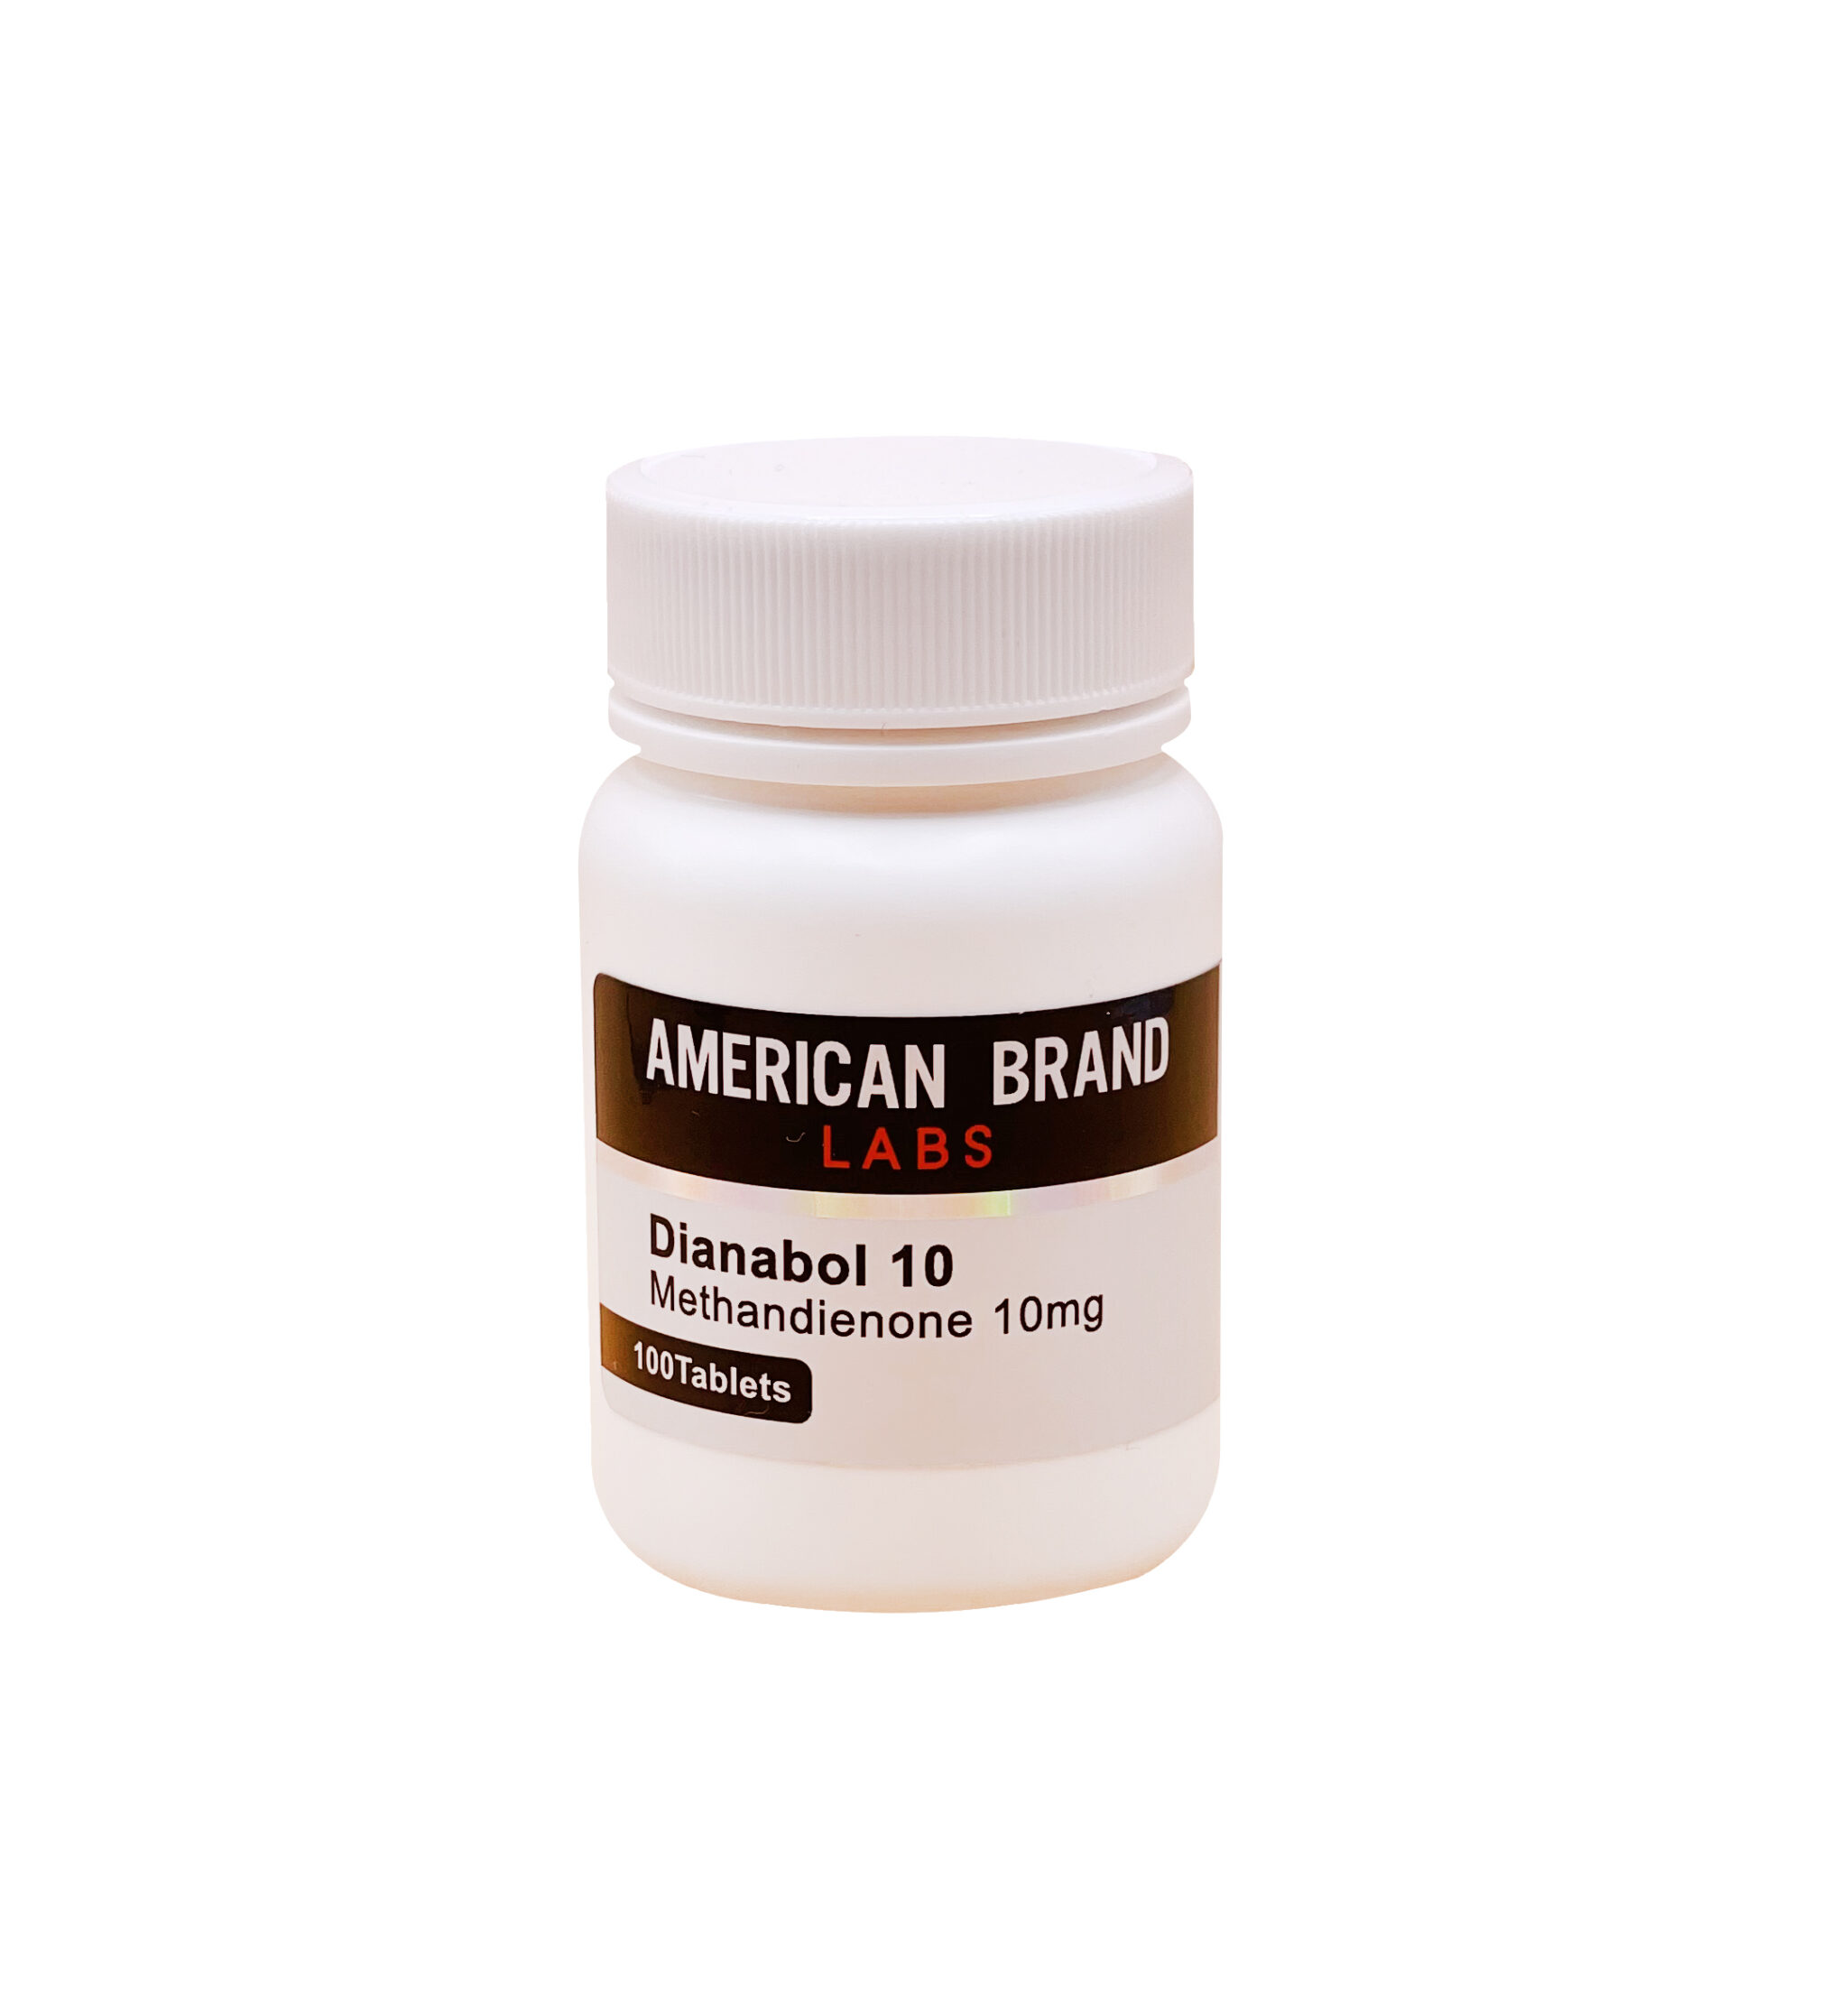 Dianabol 10 (100 Tablets)  – American Brand